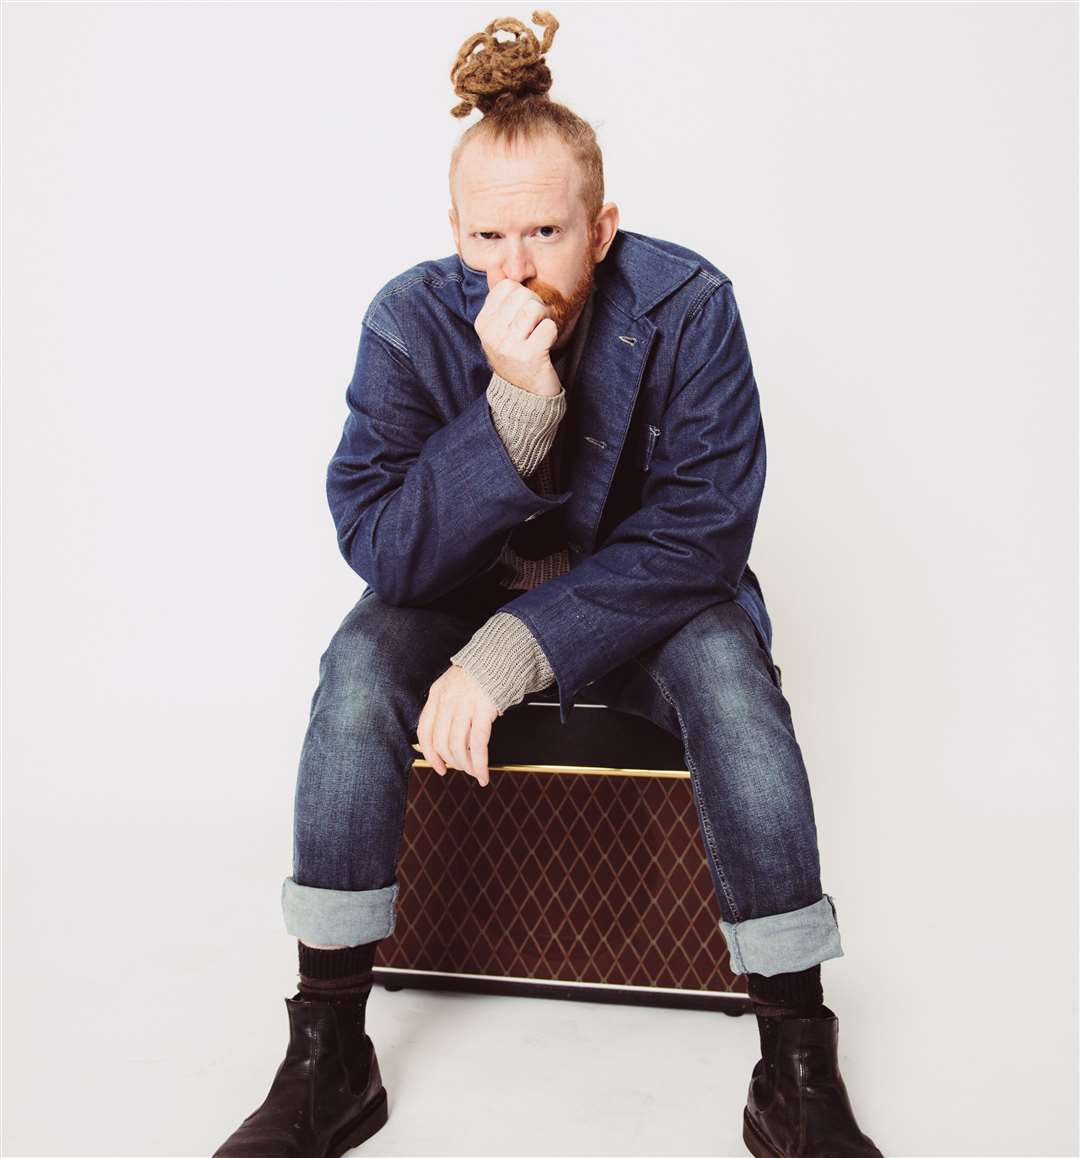 Newton Faulkner has been starring in Green Day's musical, American Idiot